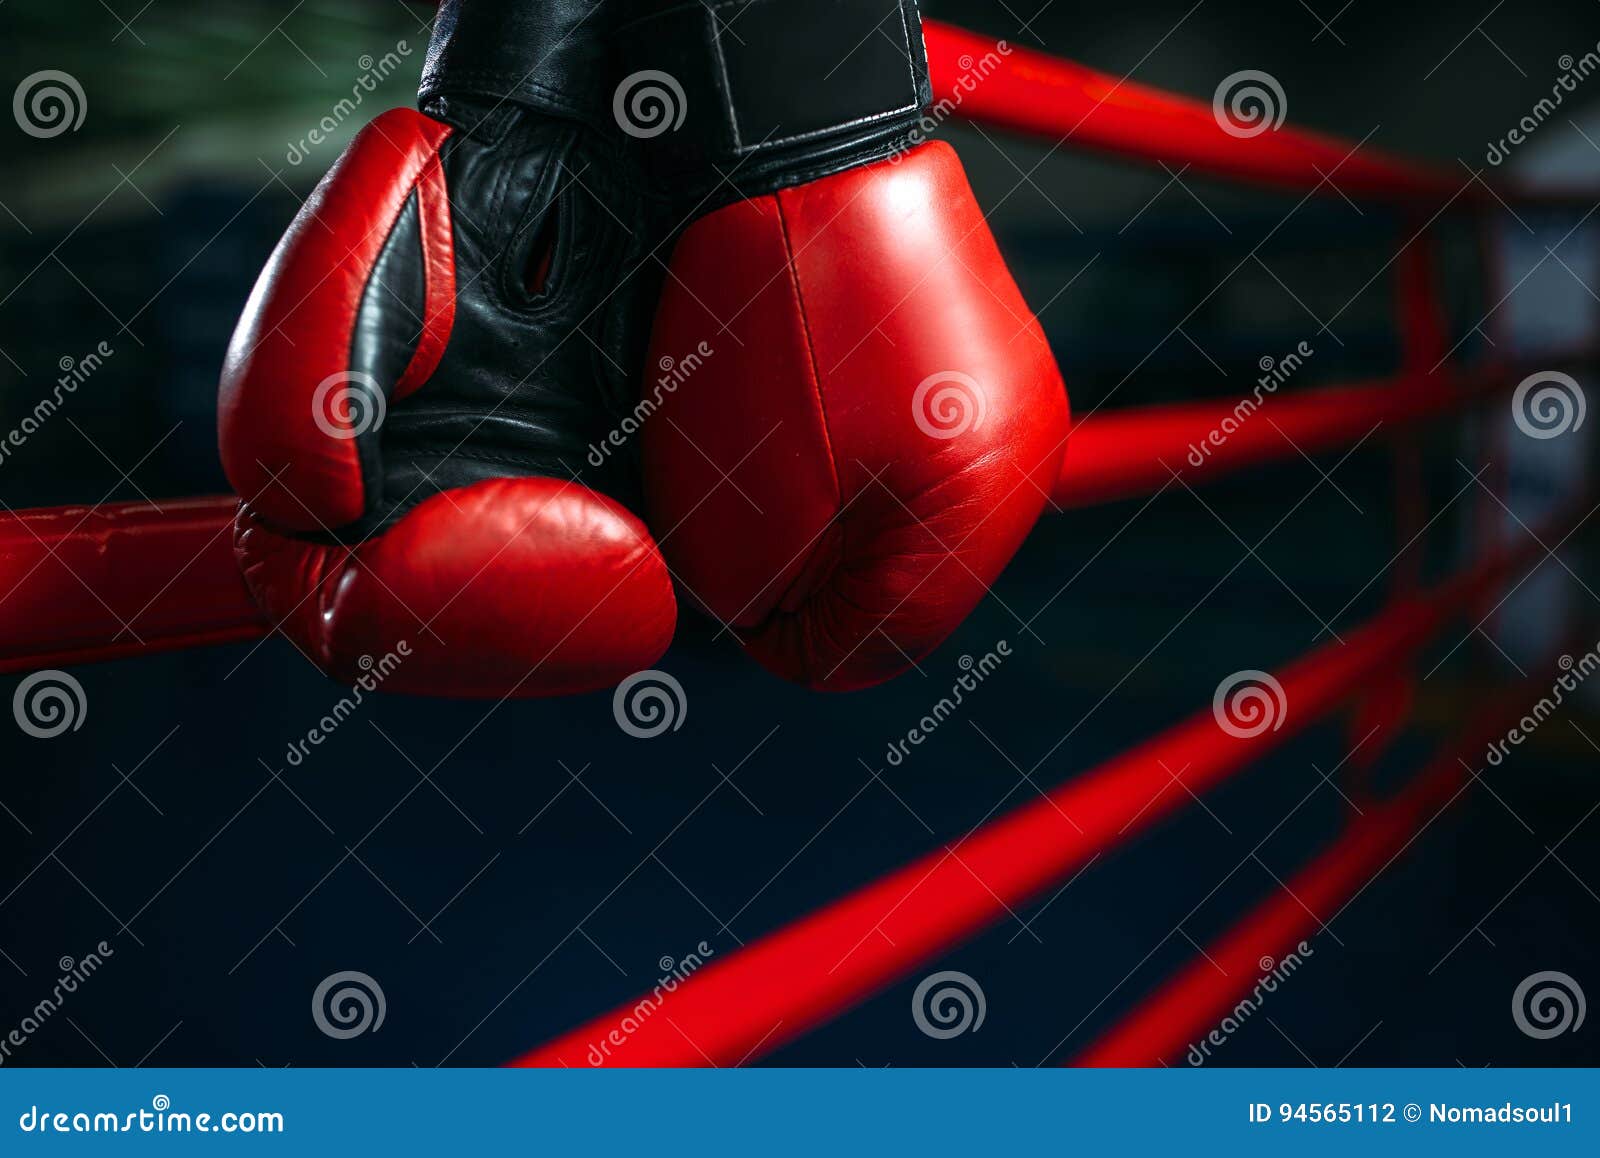 gloves on the ring ropes, boxing concept, nobody